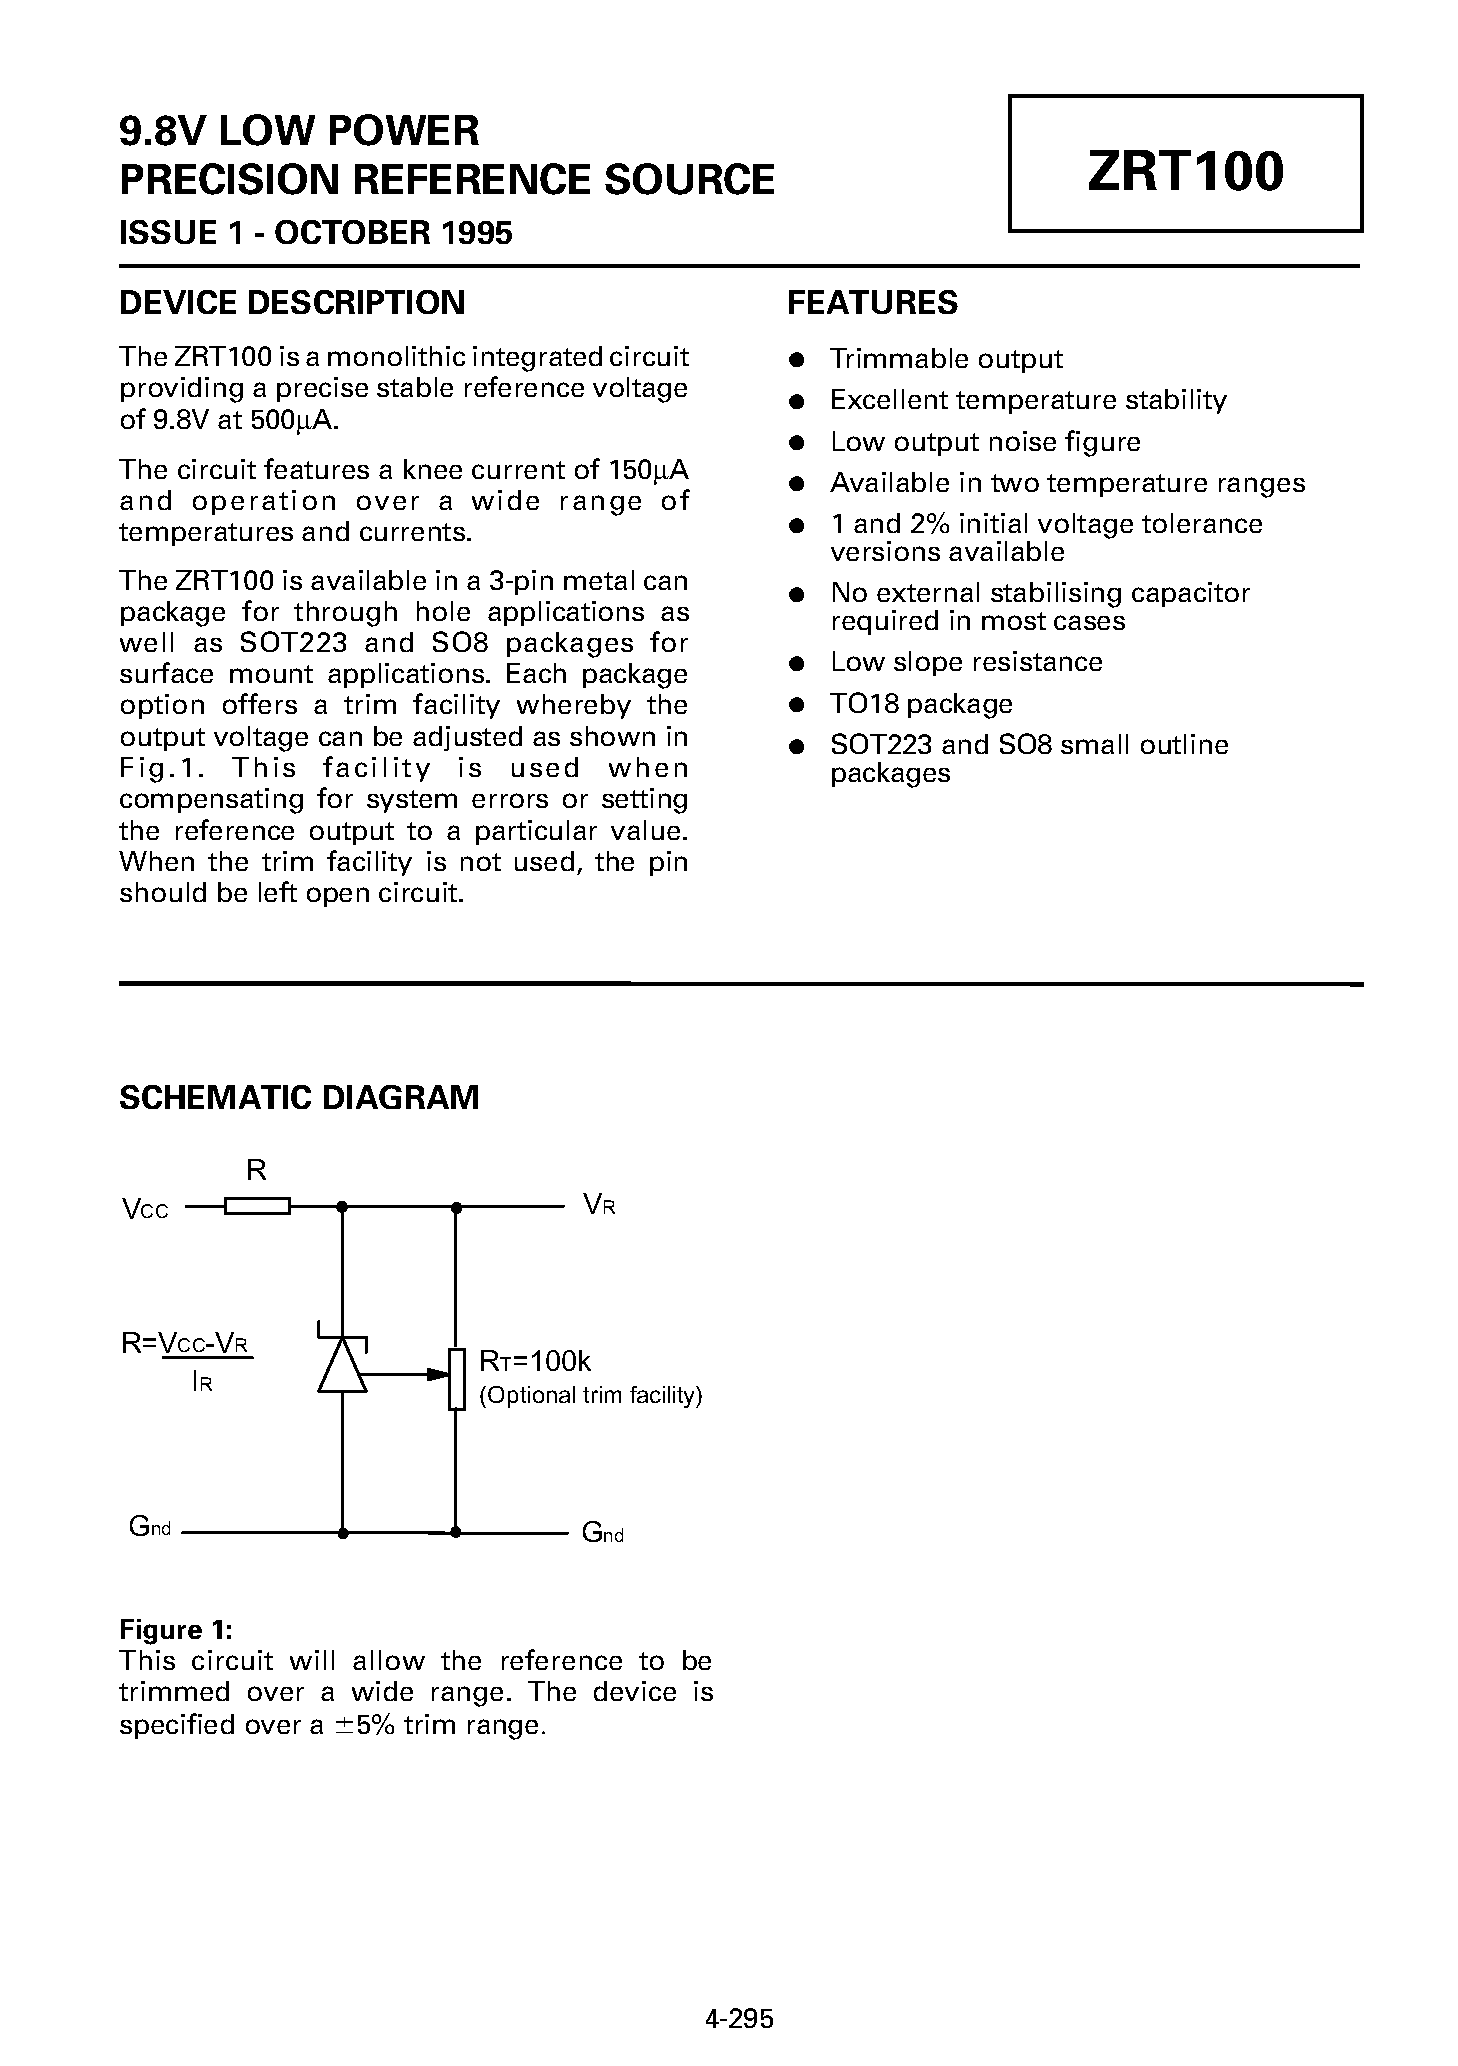 Datasheet ZRT100C1 - 9.8V LOW POWER PRECISION REFERENCE SOURCE page 1